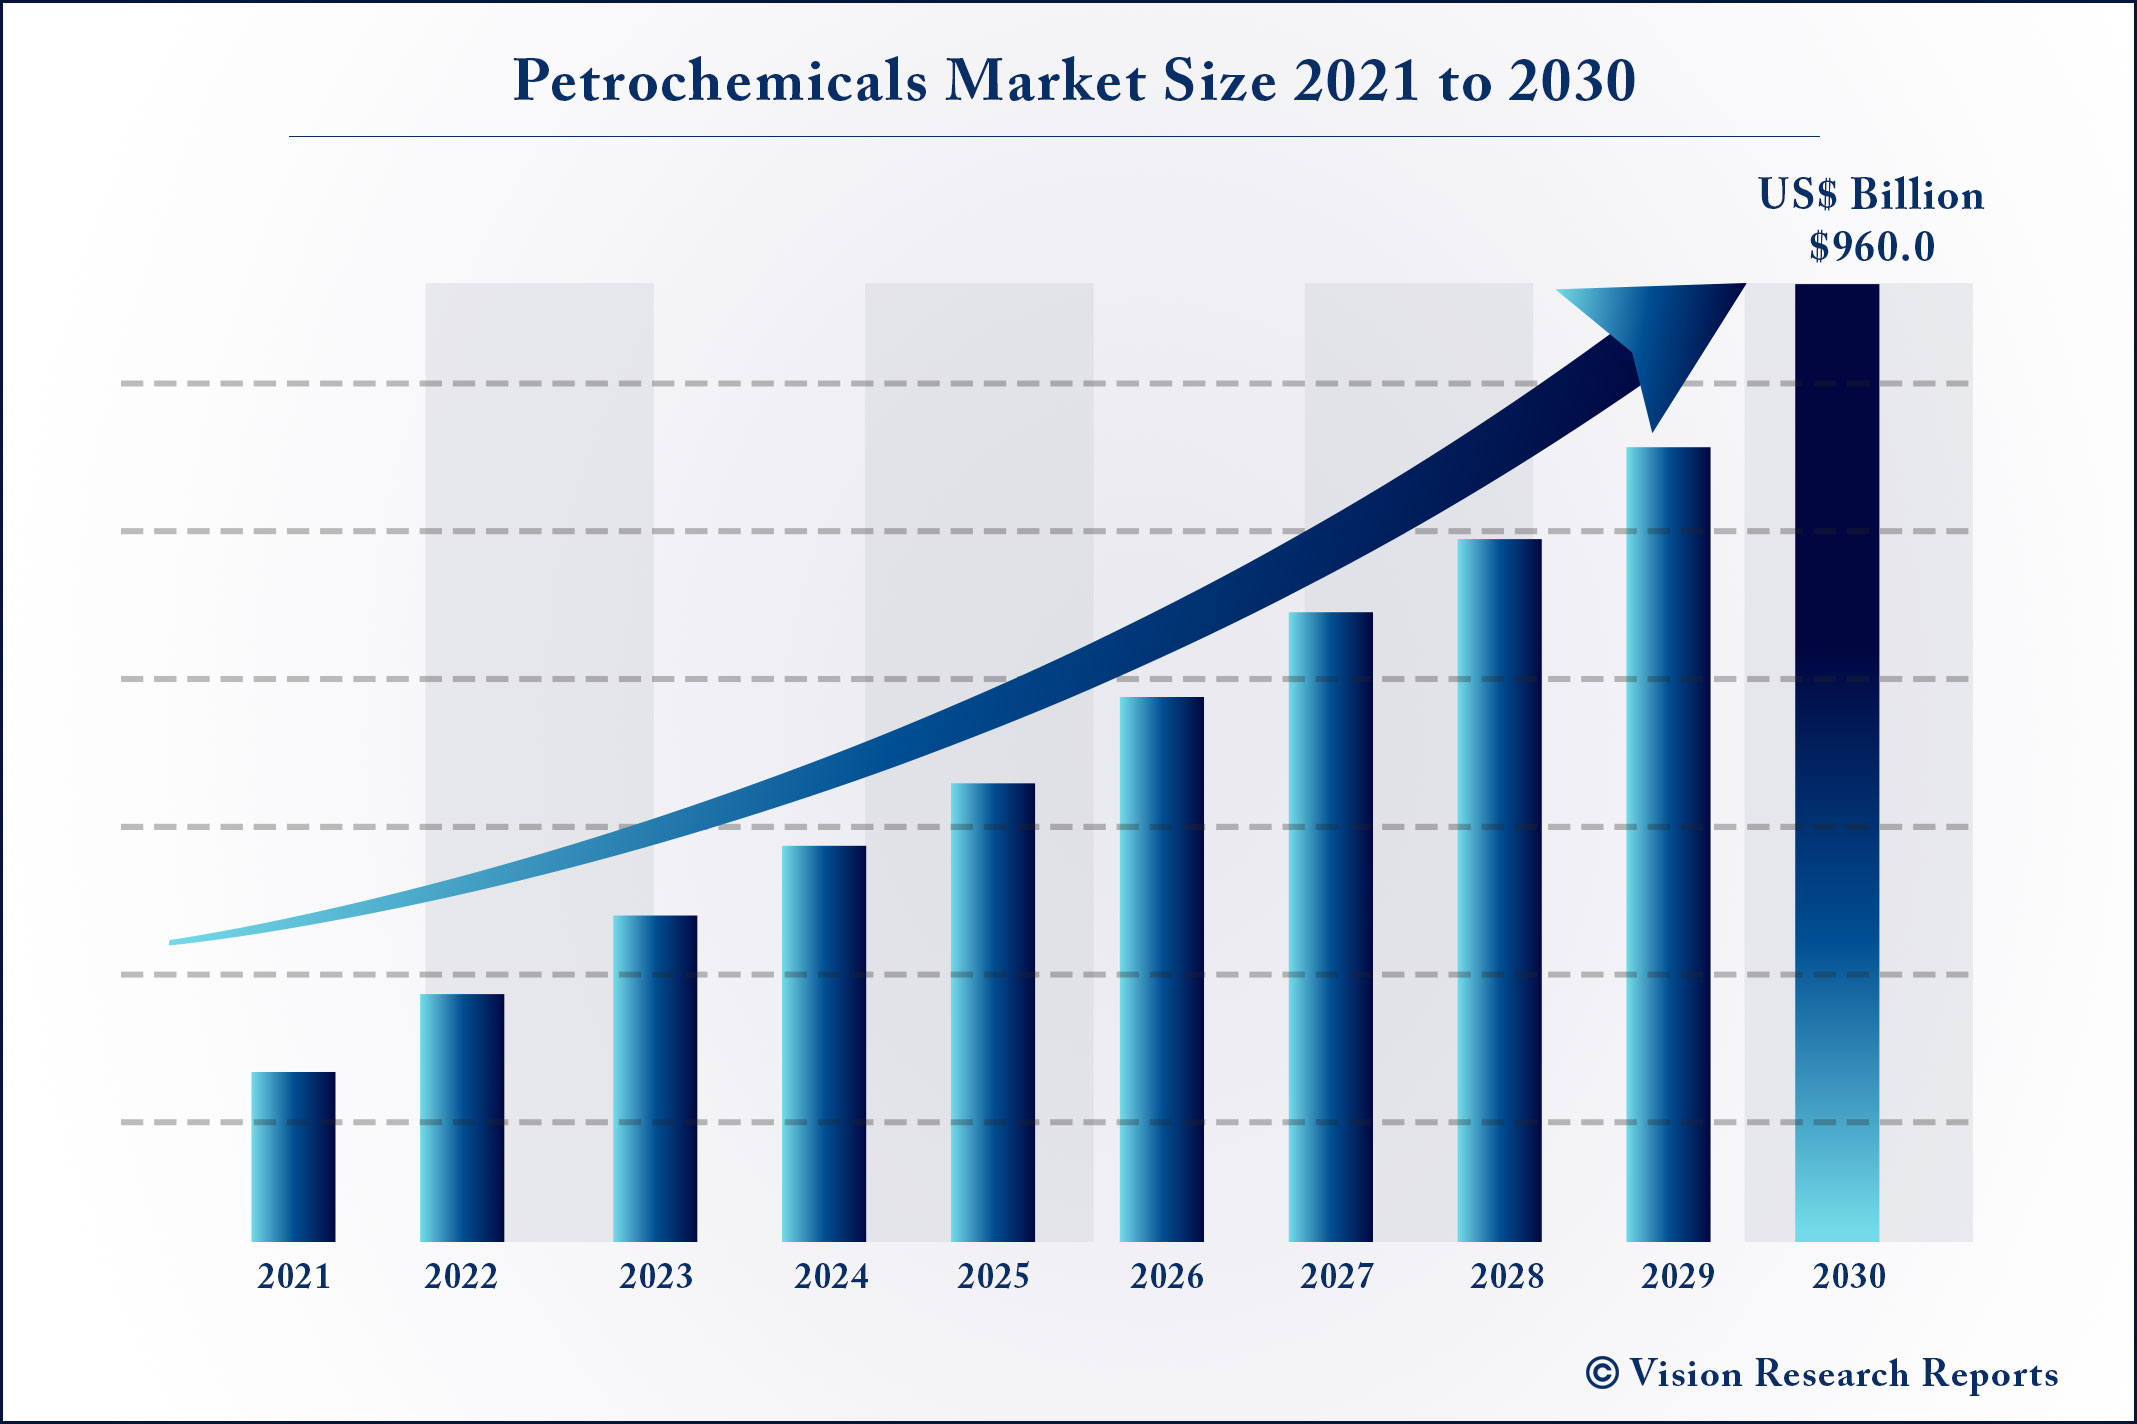 Petrochemicals Market Size 2021 to 2030